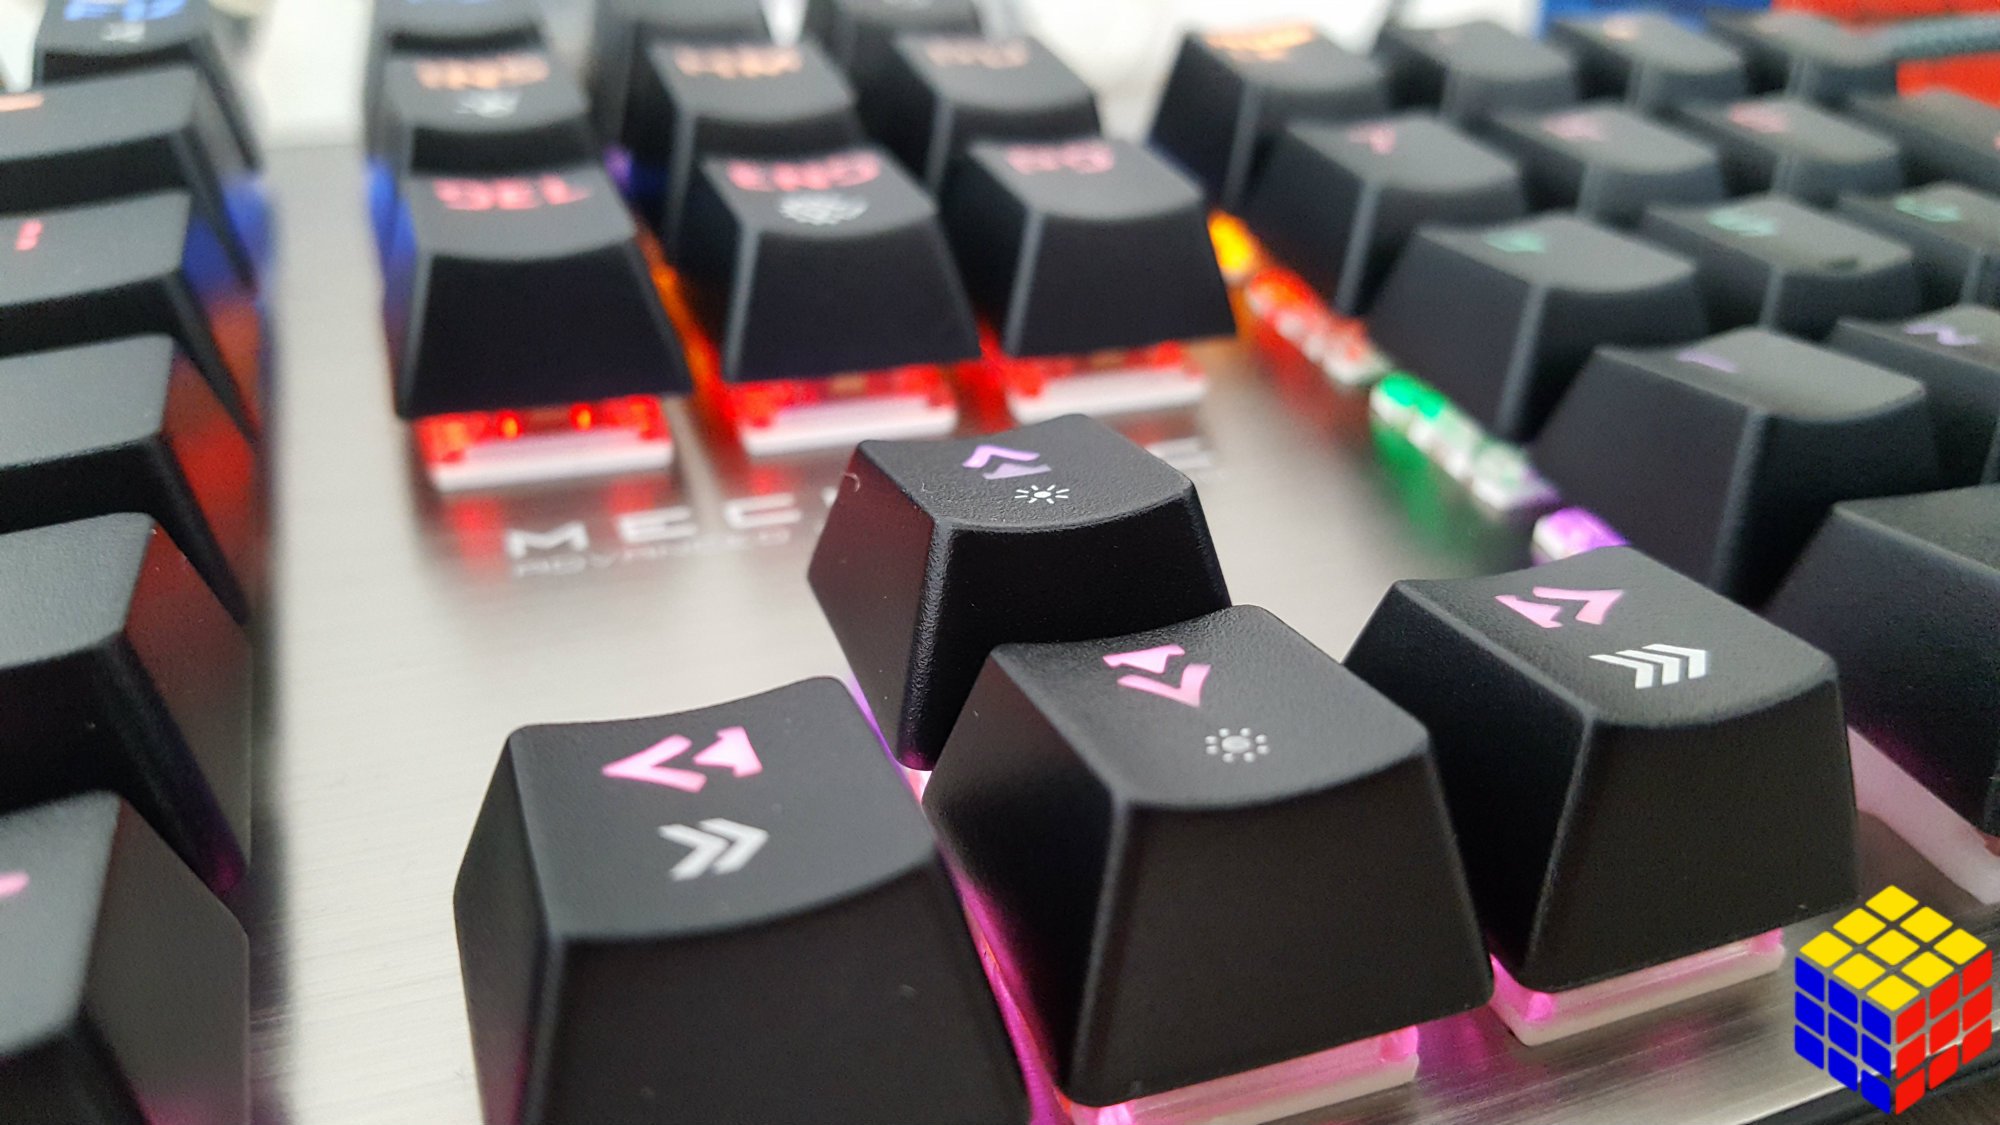 E-3LUE EKM753 Review: A mechanical keyboard for low-value gamers with excellent features